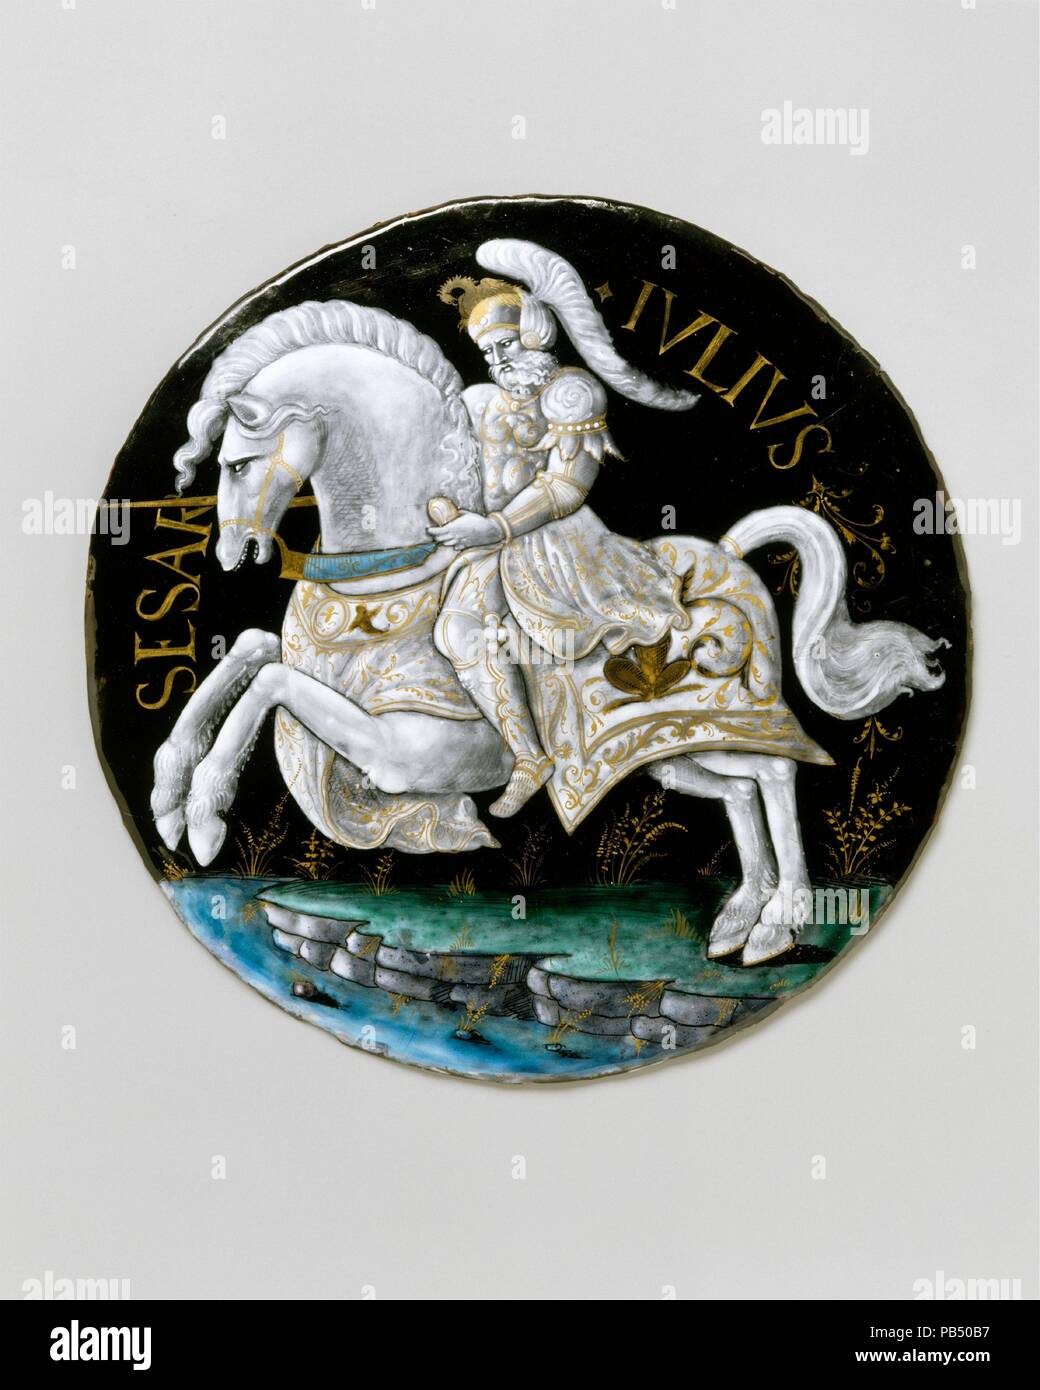 Julius Caesar. Artist: Workshop of Colin Nouailher (French, active 1539, d. after 1571). Culture: French, Limoges. Dimensions: Diameter (without frame): 9 1/2 in. (24.1 cm);  Diameter (with frame): 14 7/8 in. (37.8 cm). Date: probably ca. 1541.  This portrait of Julius Caesar is part of a series depicting the Nine Worthies, historical figures thought to embody the values of chivalry--from antiquity: Hector, Alexander, and Julius Caesar; from the Old Testament: Joshua, David, and Judas Maccabeus; and from the Middle Ages: King Arthur, Charlemagne, and Godefroy de Bouillon. The Nine Worthies wer Stock Photo